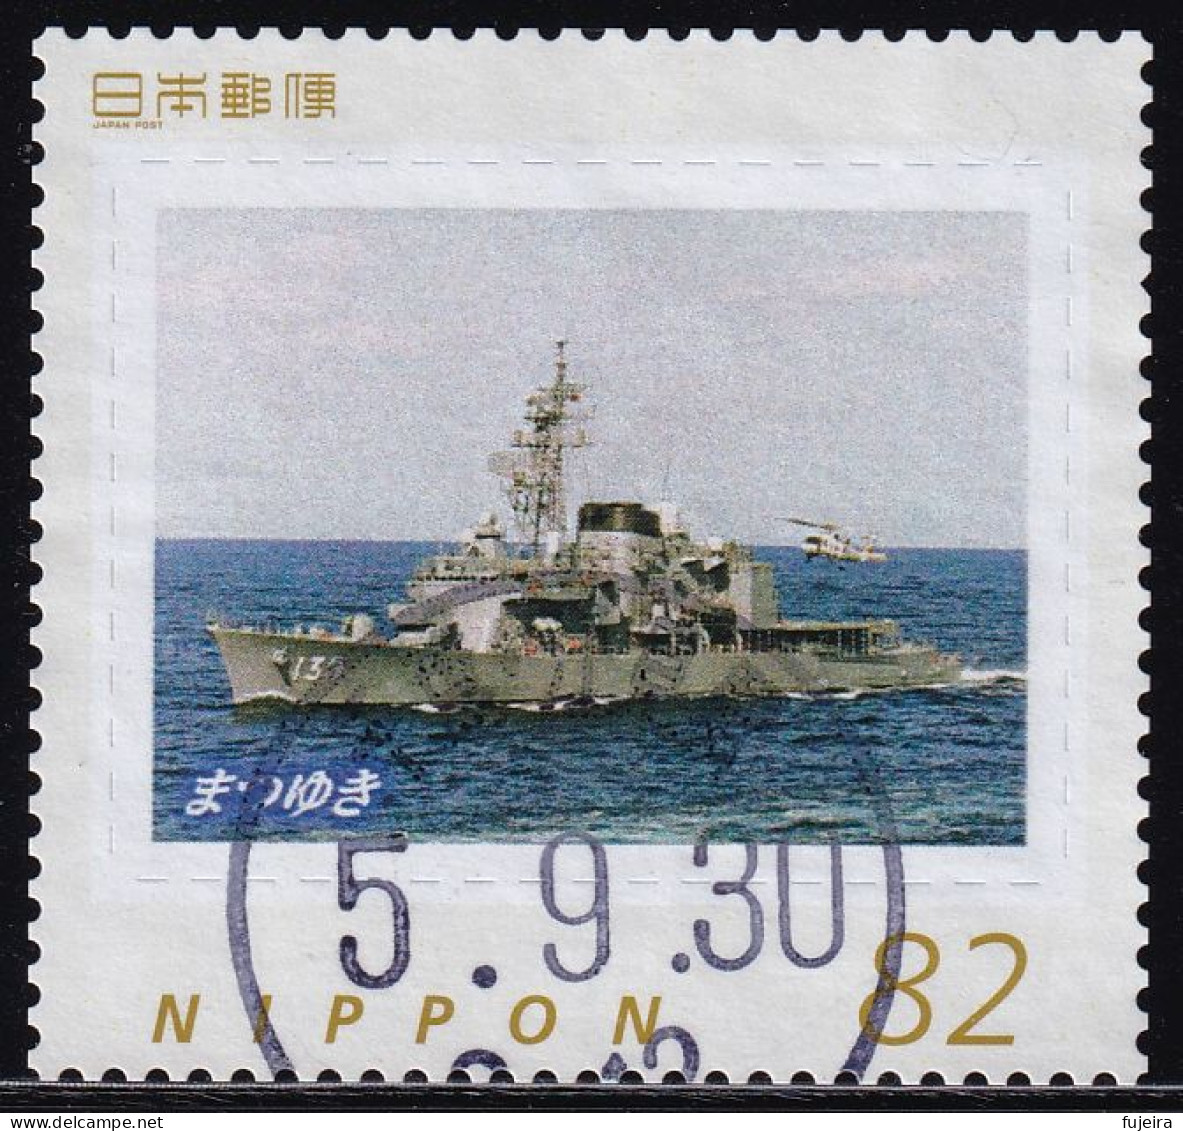 Japan Personalized Stamp, Ship Helicopter (jpv9987) Used - Gebruikt